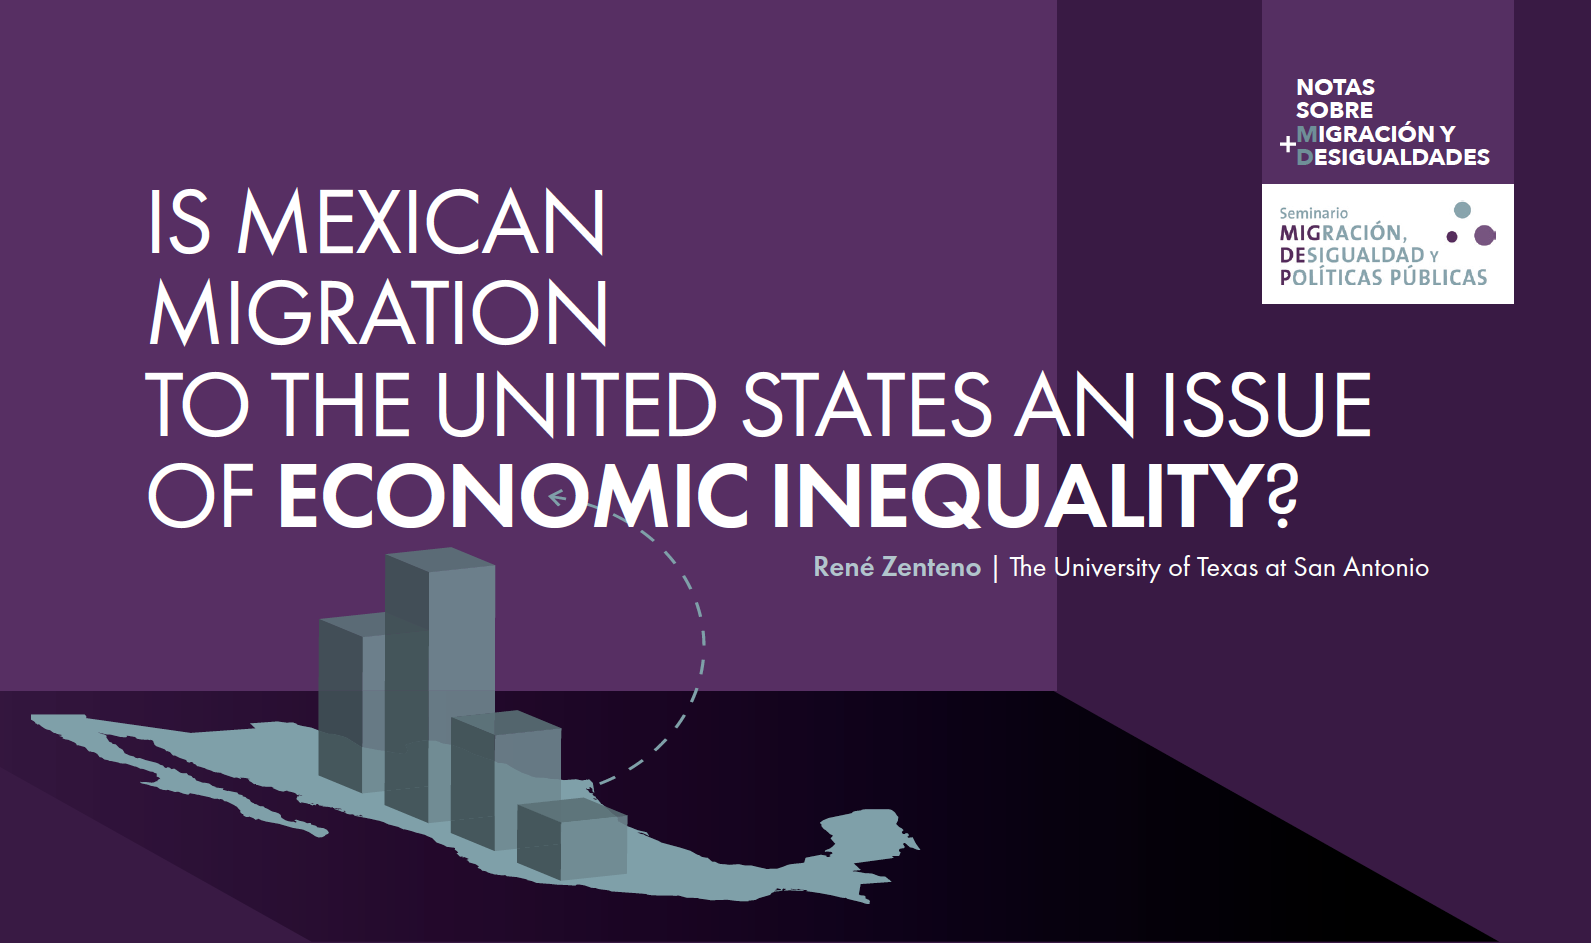 Is Mexican migration to the United States an issue of economic inequality?